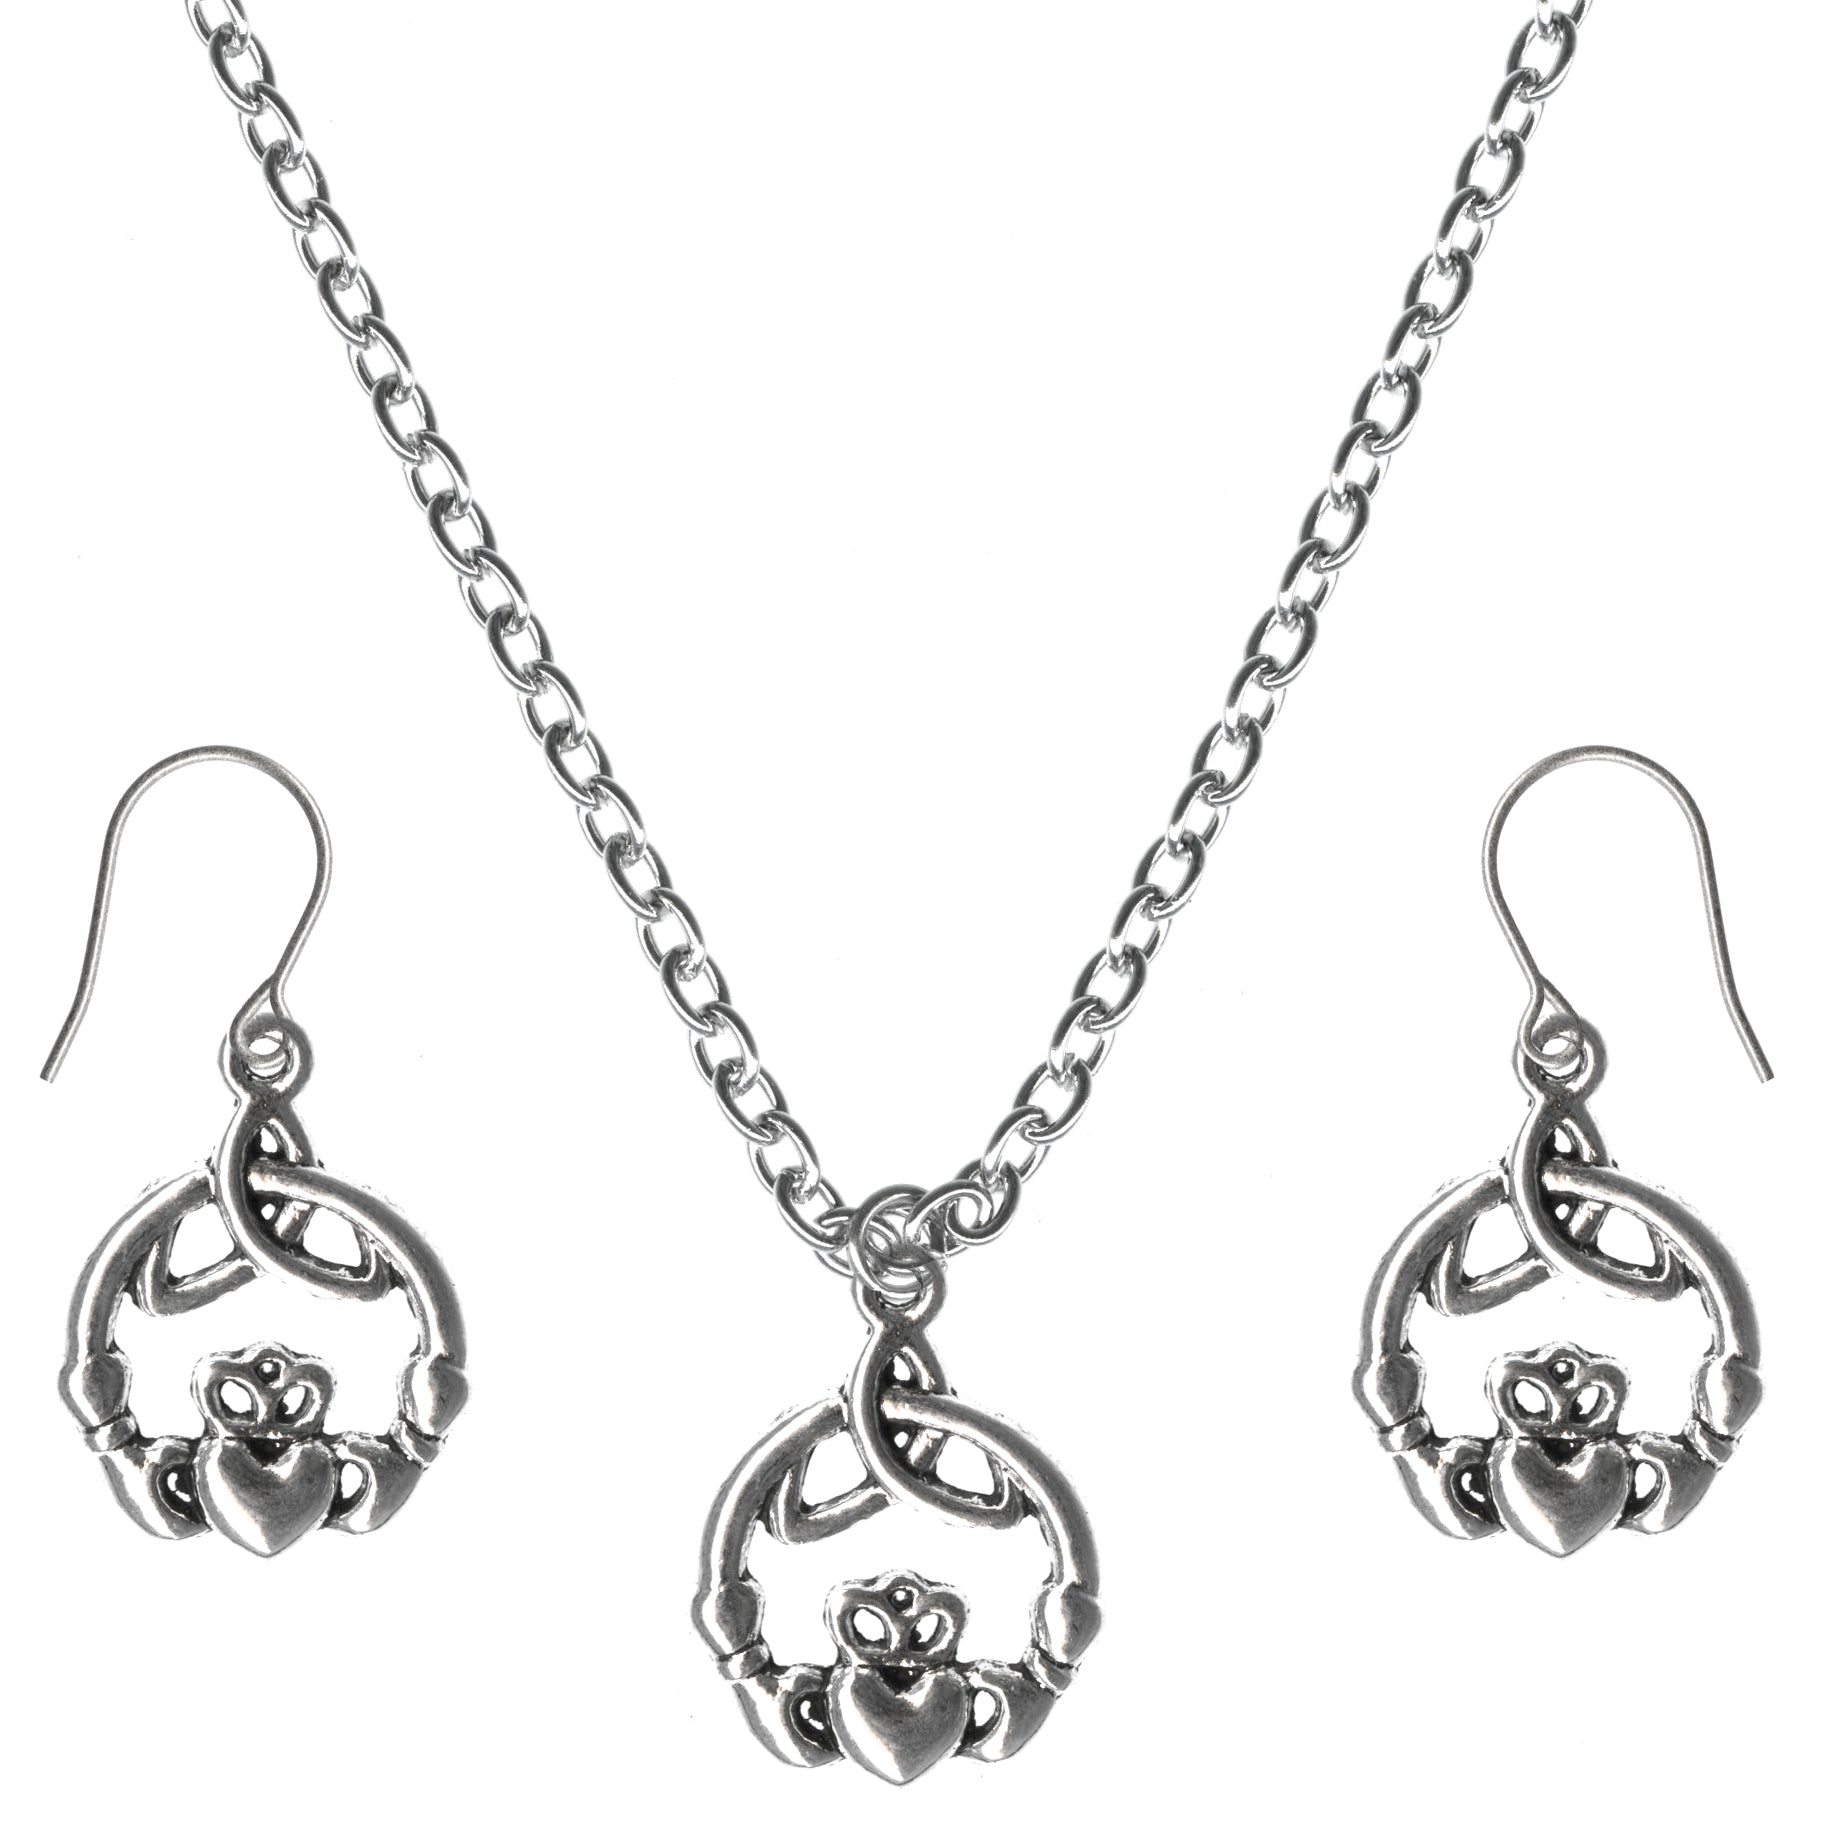 Irish Claddagh for Loyalty Friendship Charm Steel Chain Necklace and Hypoallergenic Titanium Earrings Set